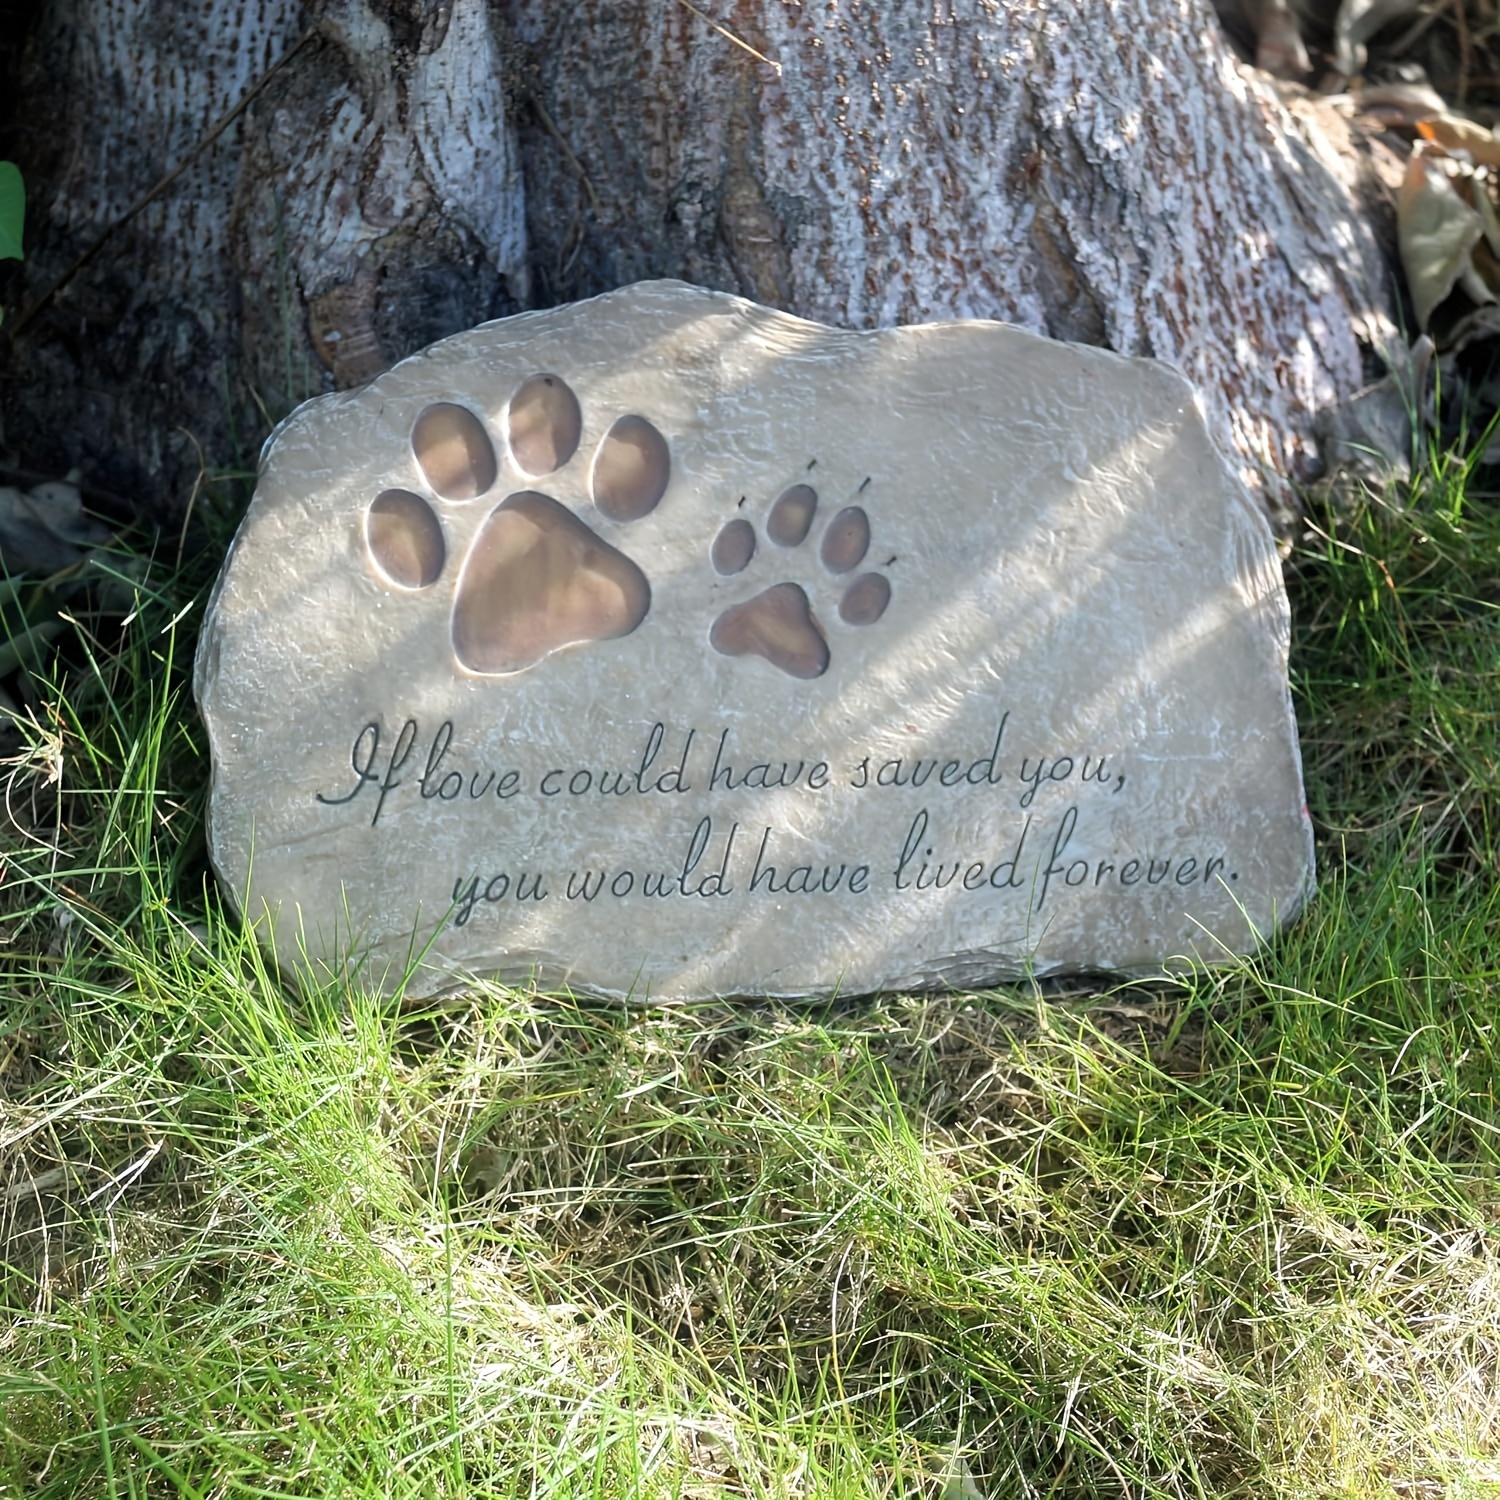 

Paw Prints Dog Pet , Pet Garden Stone Grave Marker For Dog Or Cat, Hand-painted Pet Memorial Gift Loss Gifts Sympathy Gifts For Dogs Or Cats Indoor Or Outdoor